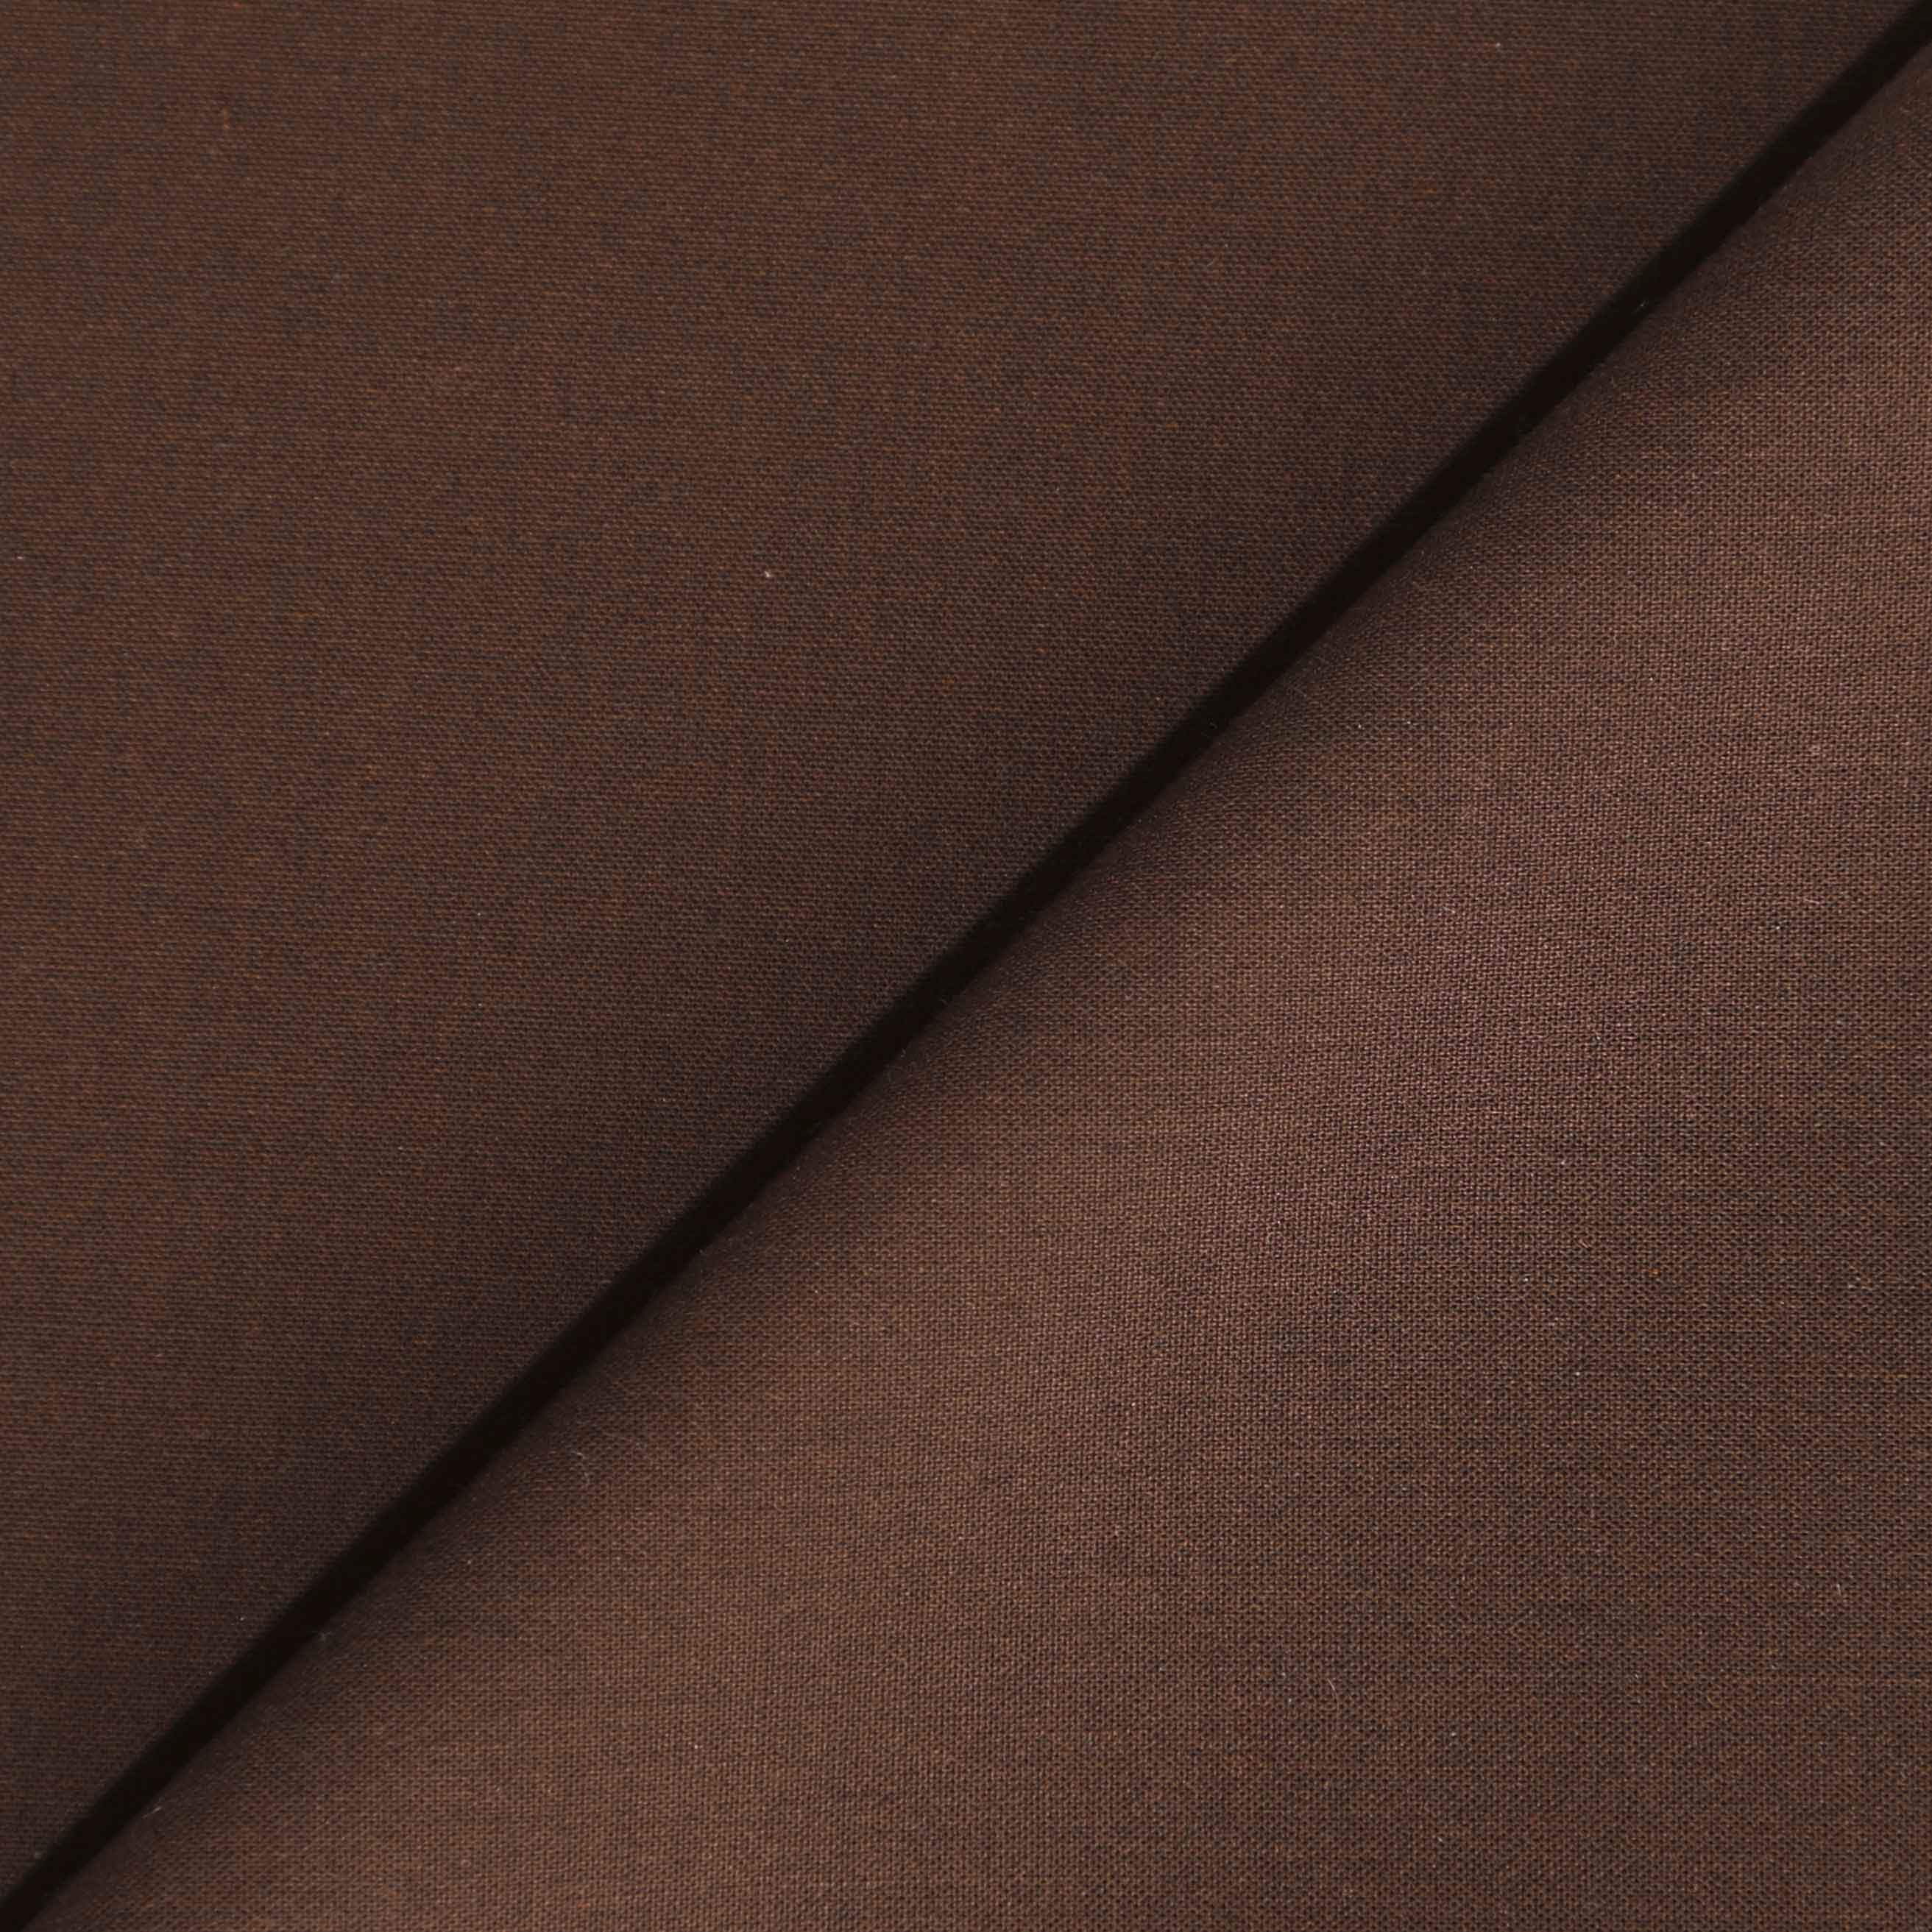 Athletic Fit Stretch Suit - Lightweight Heathered Chocolate